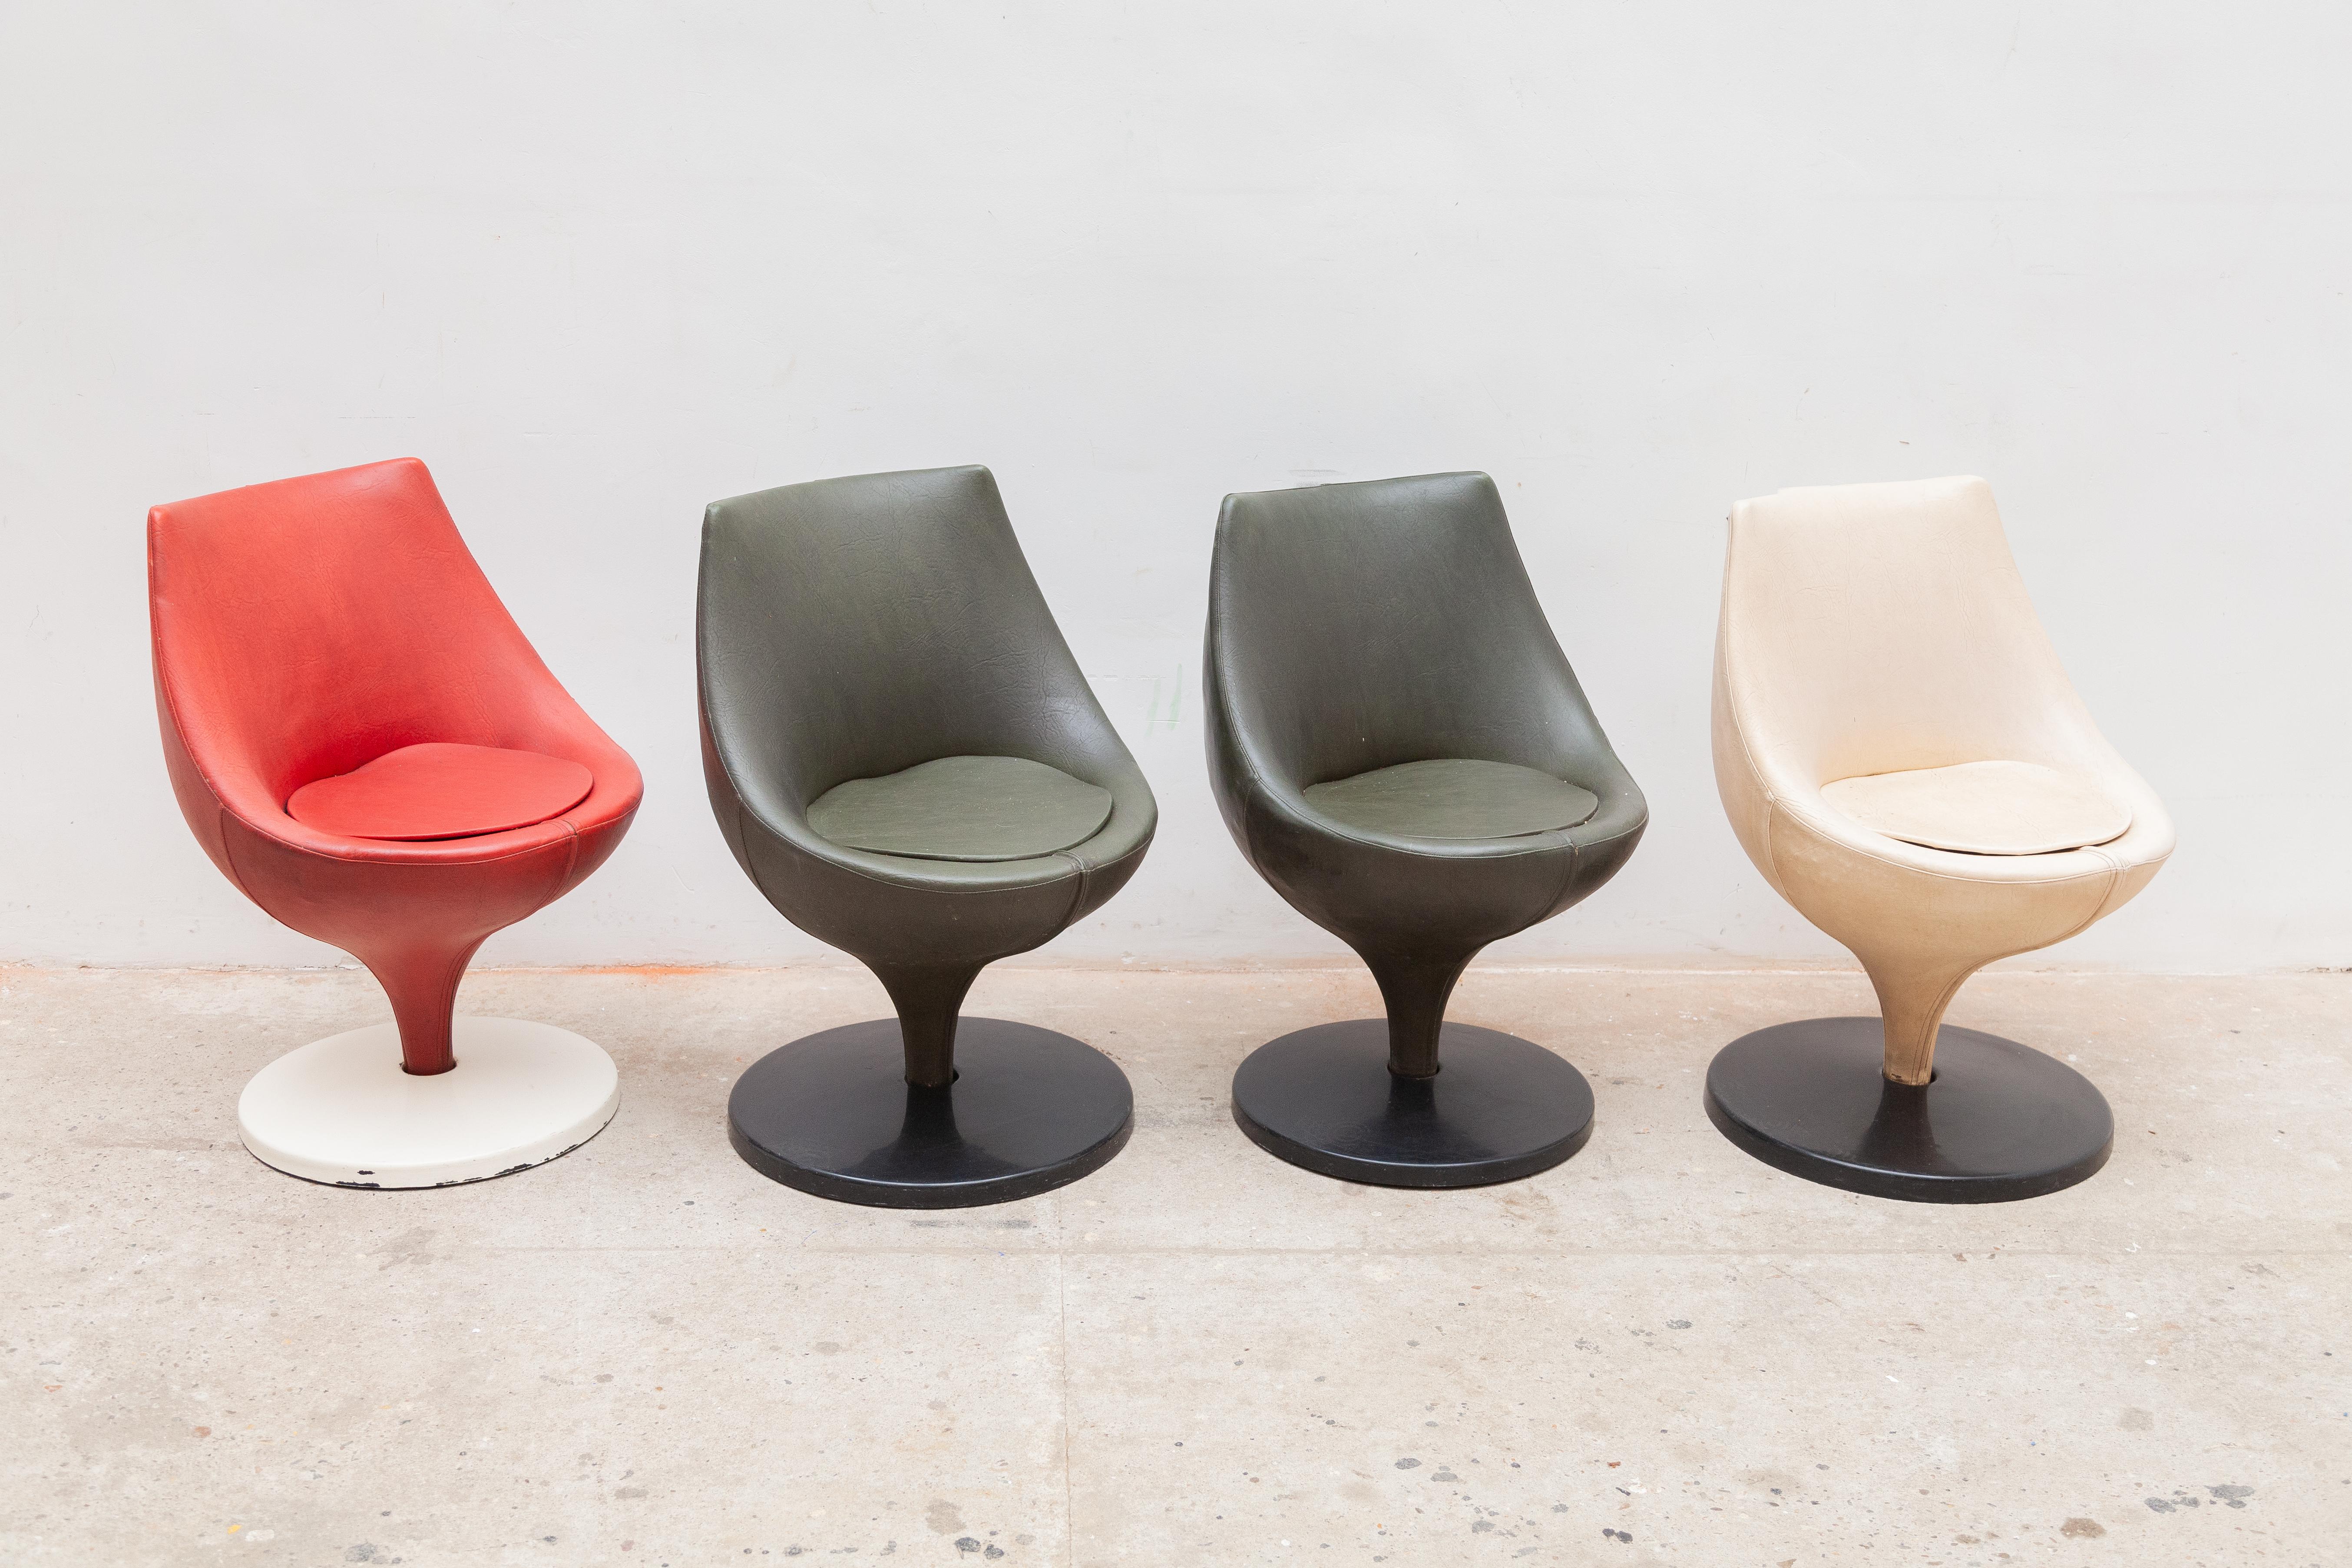 Set of four Polaris swivel dining chairs designed in 1965 by french designer Pierre Guariche for Meurop,Belgium. Featured in the colors ivory white,red and olive green skai, metal swivel base covered with black plastic disc. All four are in their